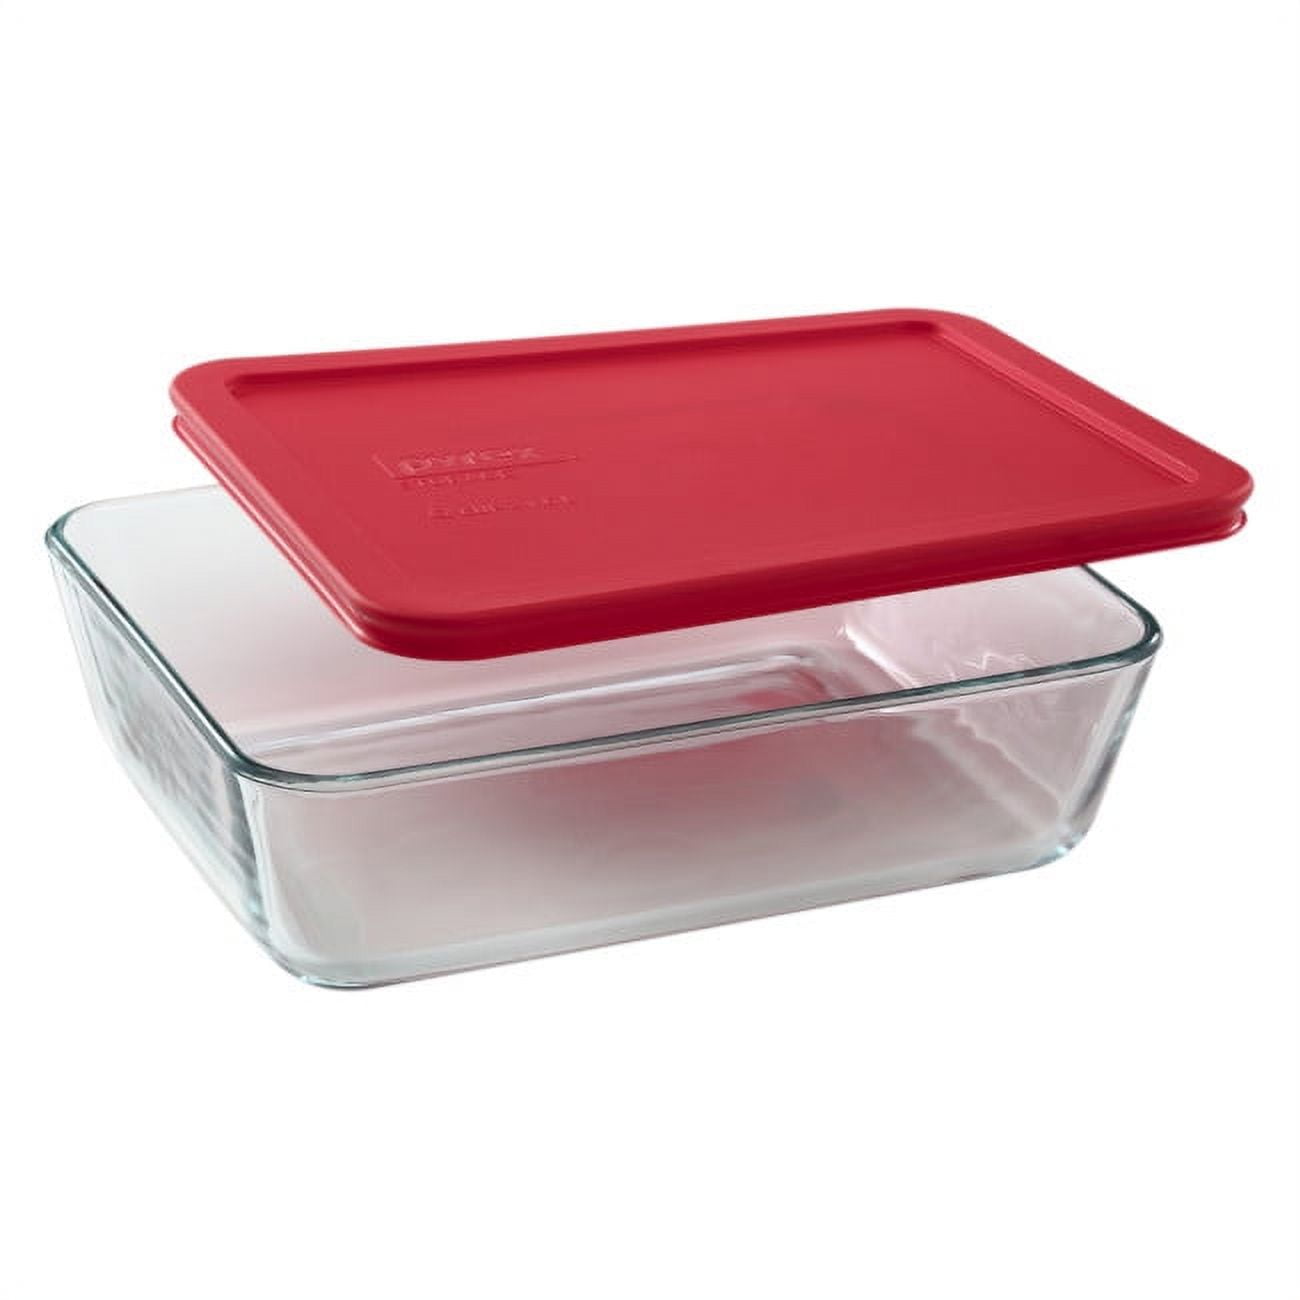 Pyrex Bake N Store 6-Piece Glass Bakeware and Storage Set with Red Lids  1090993 - The Home Depot